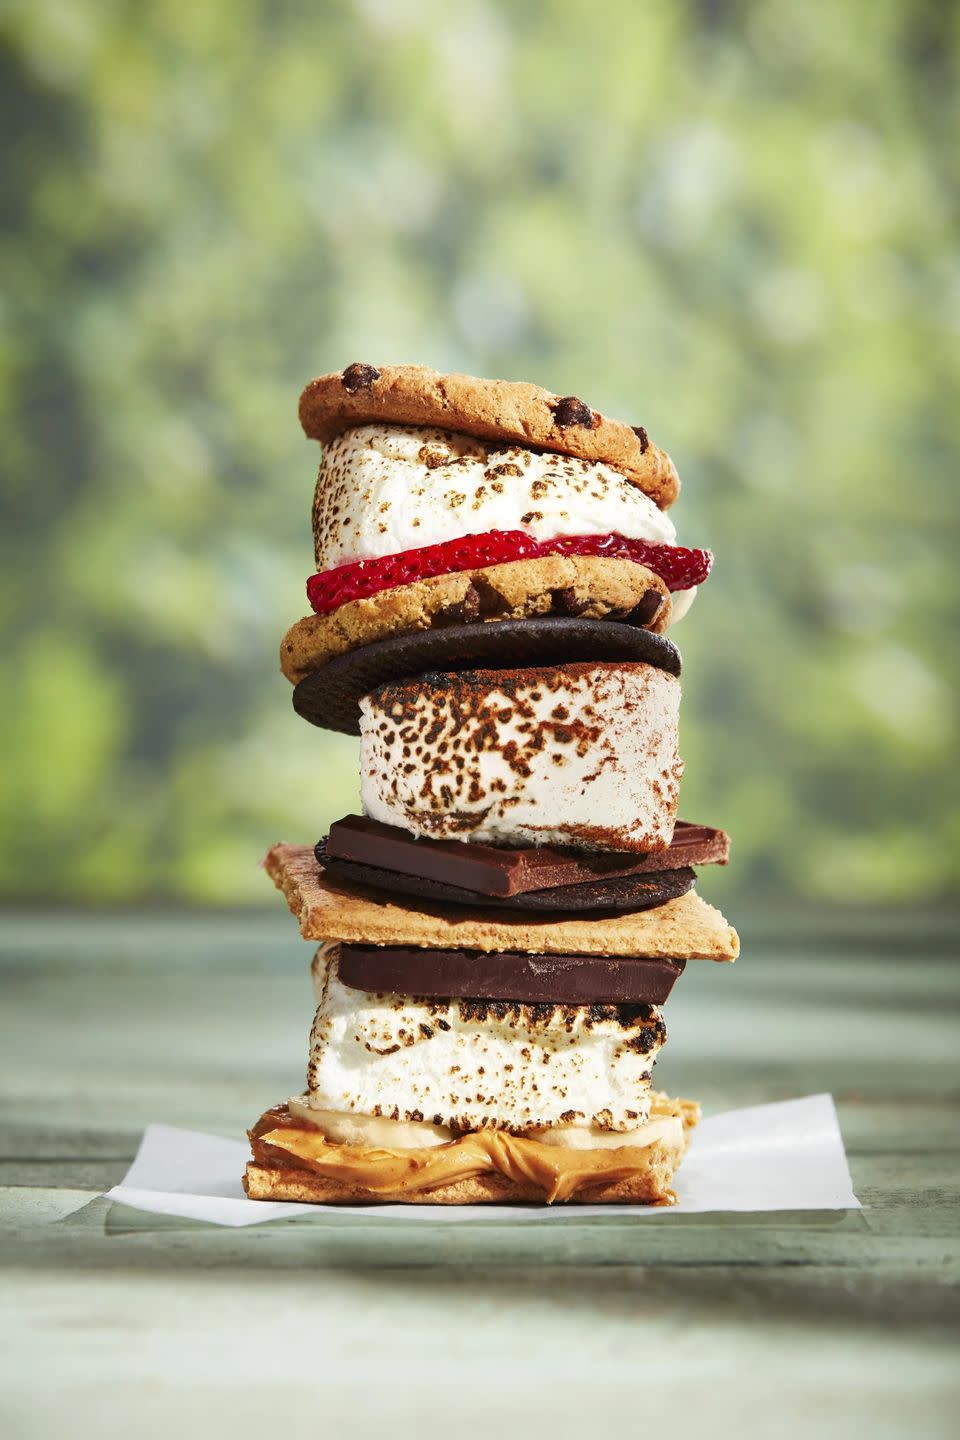 3 smores sandwiches stacked vertically one with peanut butter and banana one with strawberries on a chocolate chip cookie and another on chocolate cookies